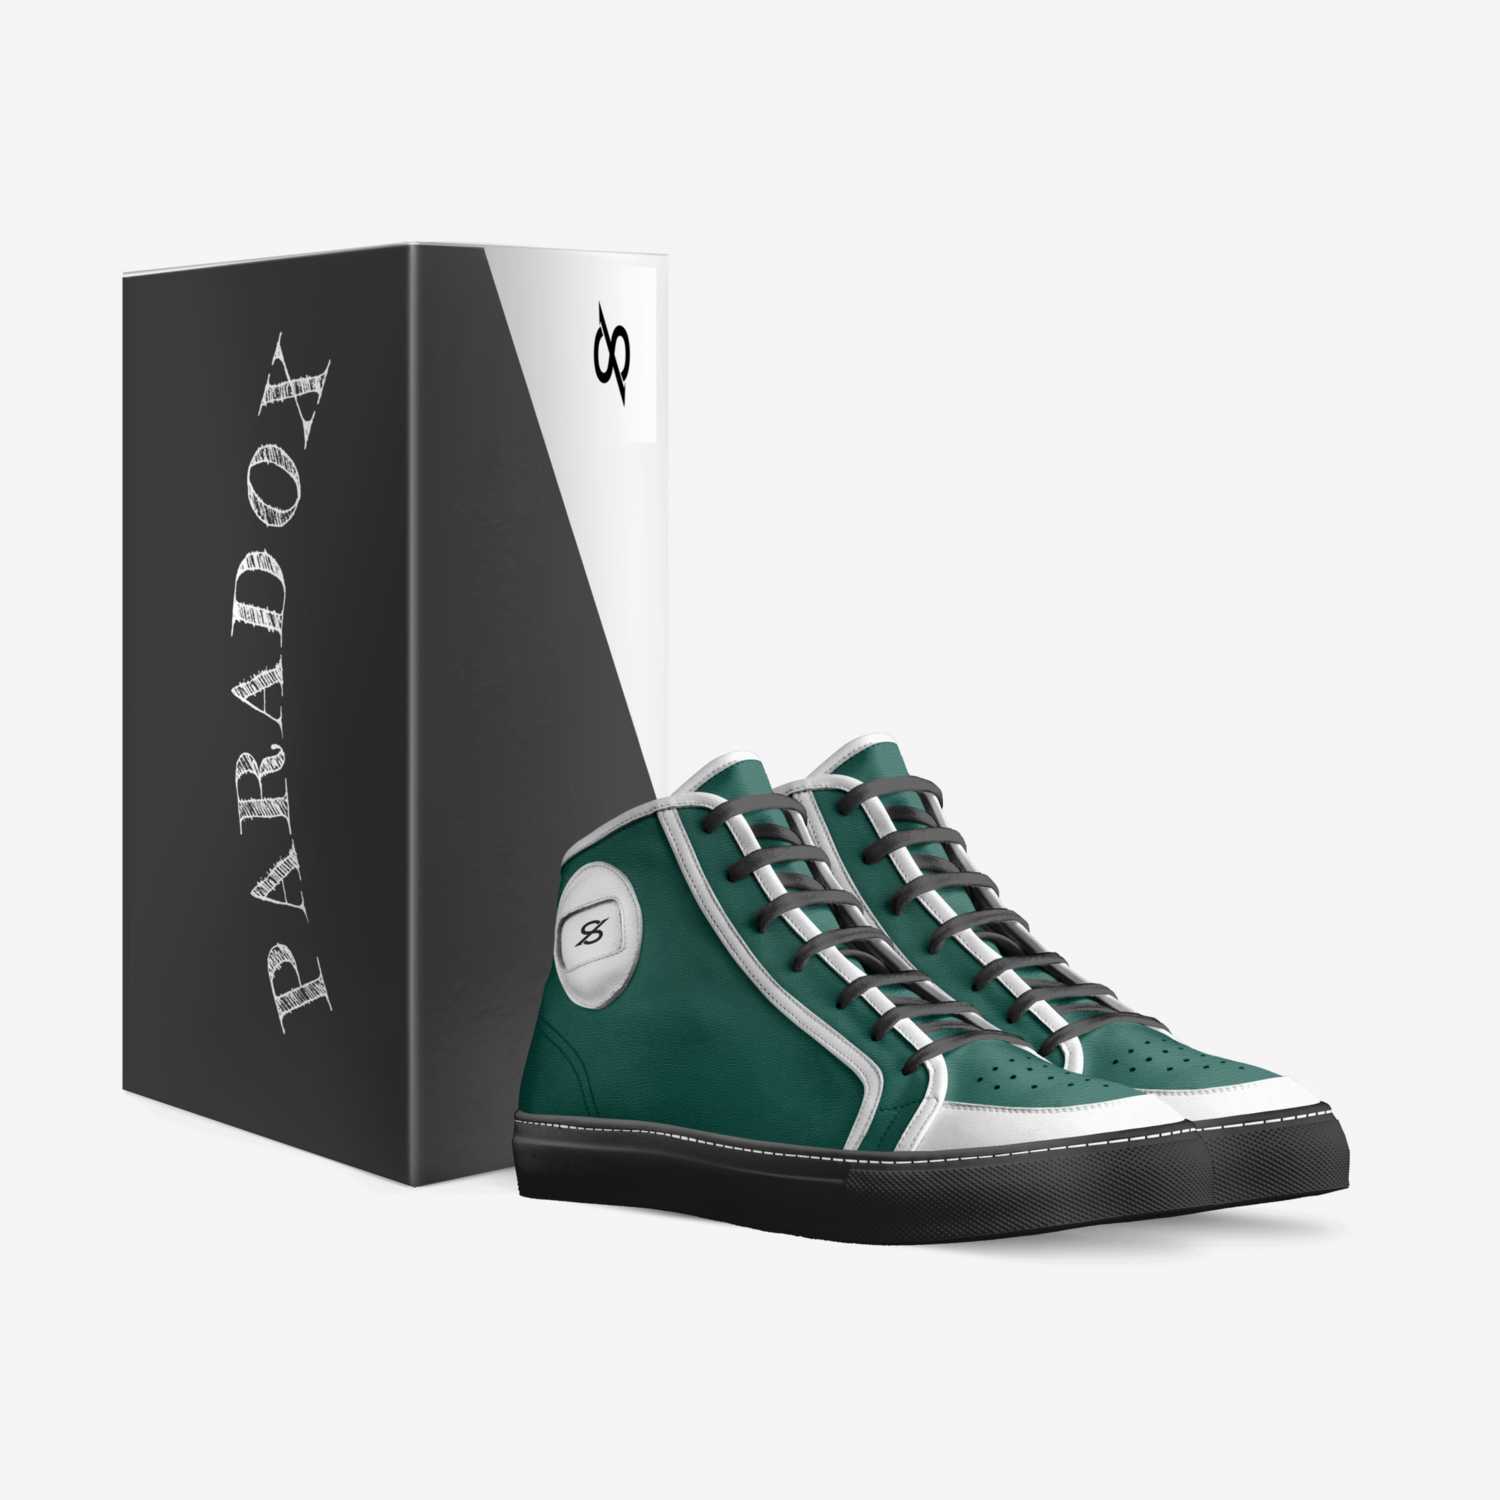 The Paradox custom made in Italy shoes by Sincere Davinci | Box view